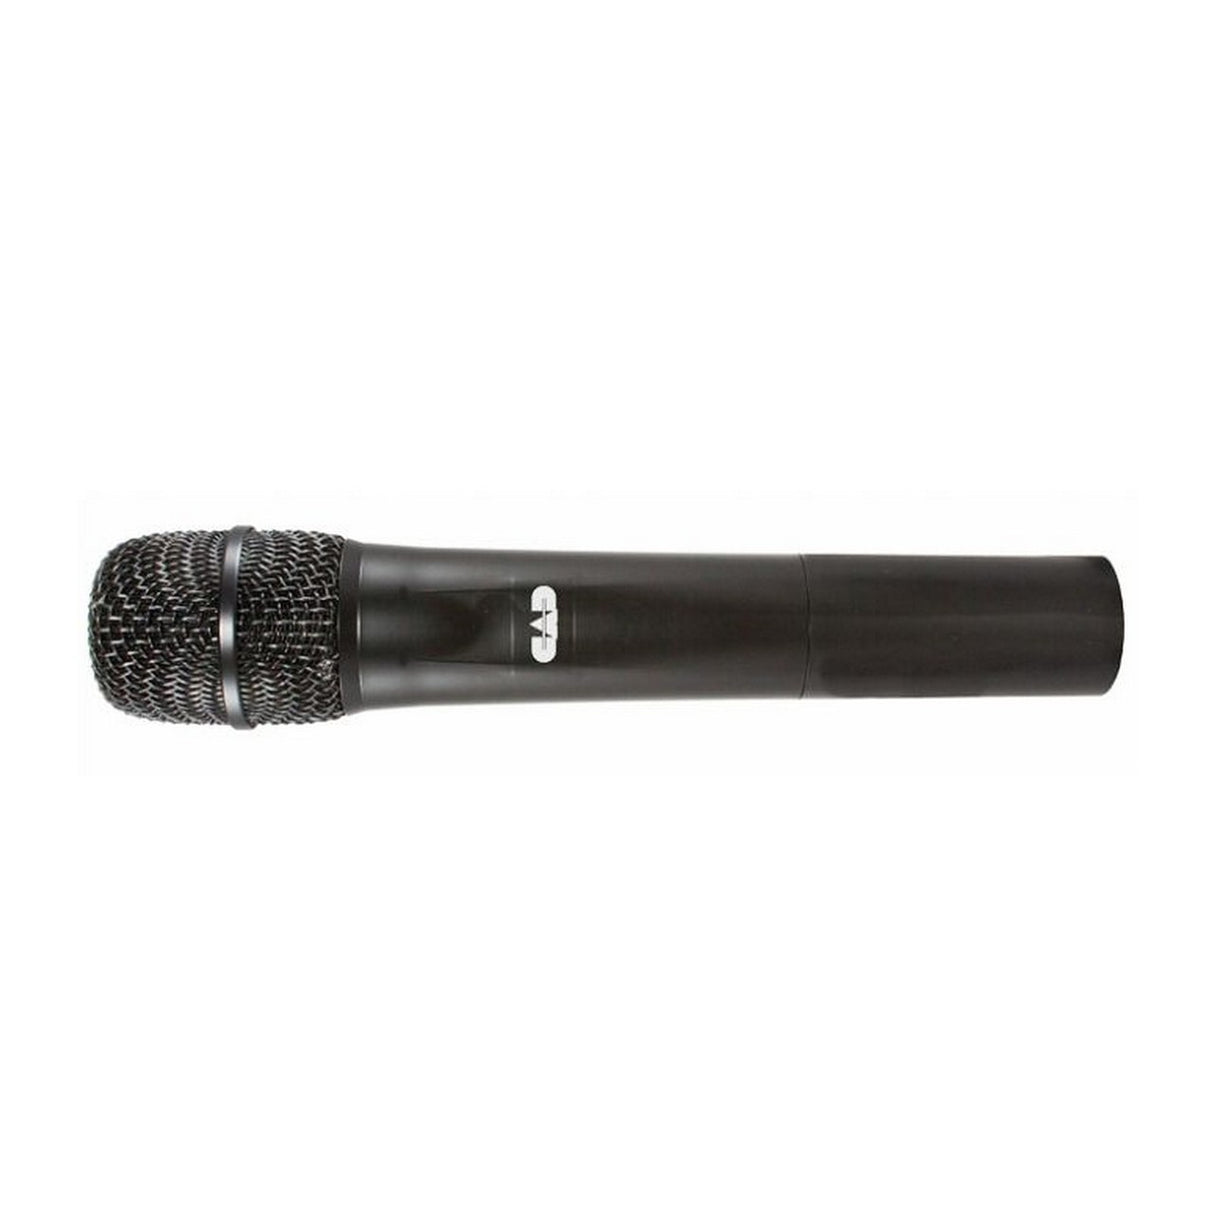 CAD Audio WX1600 G | Wireless Cardioid Dynamic Handheld Microphone System